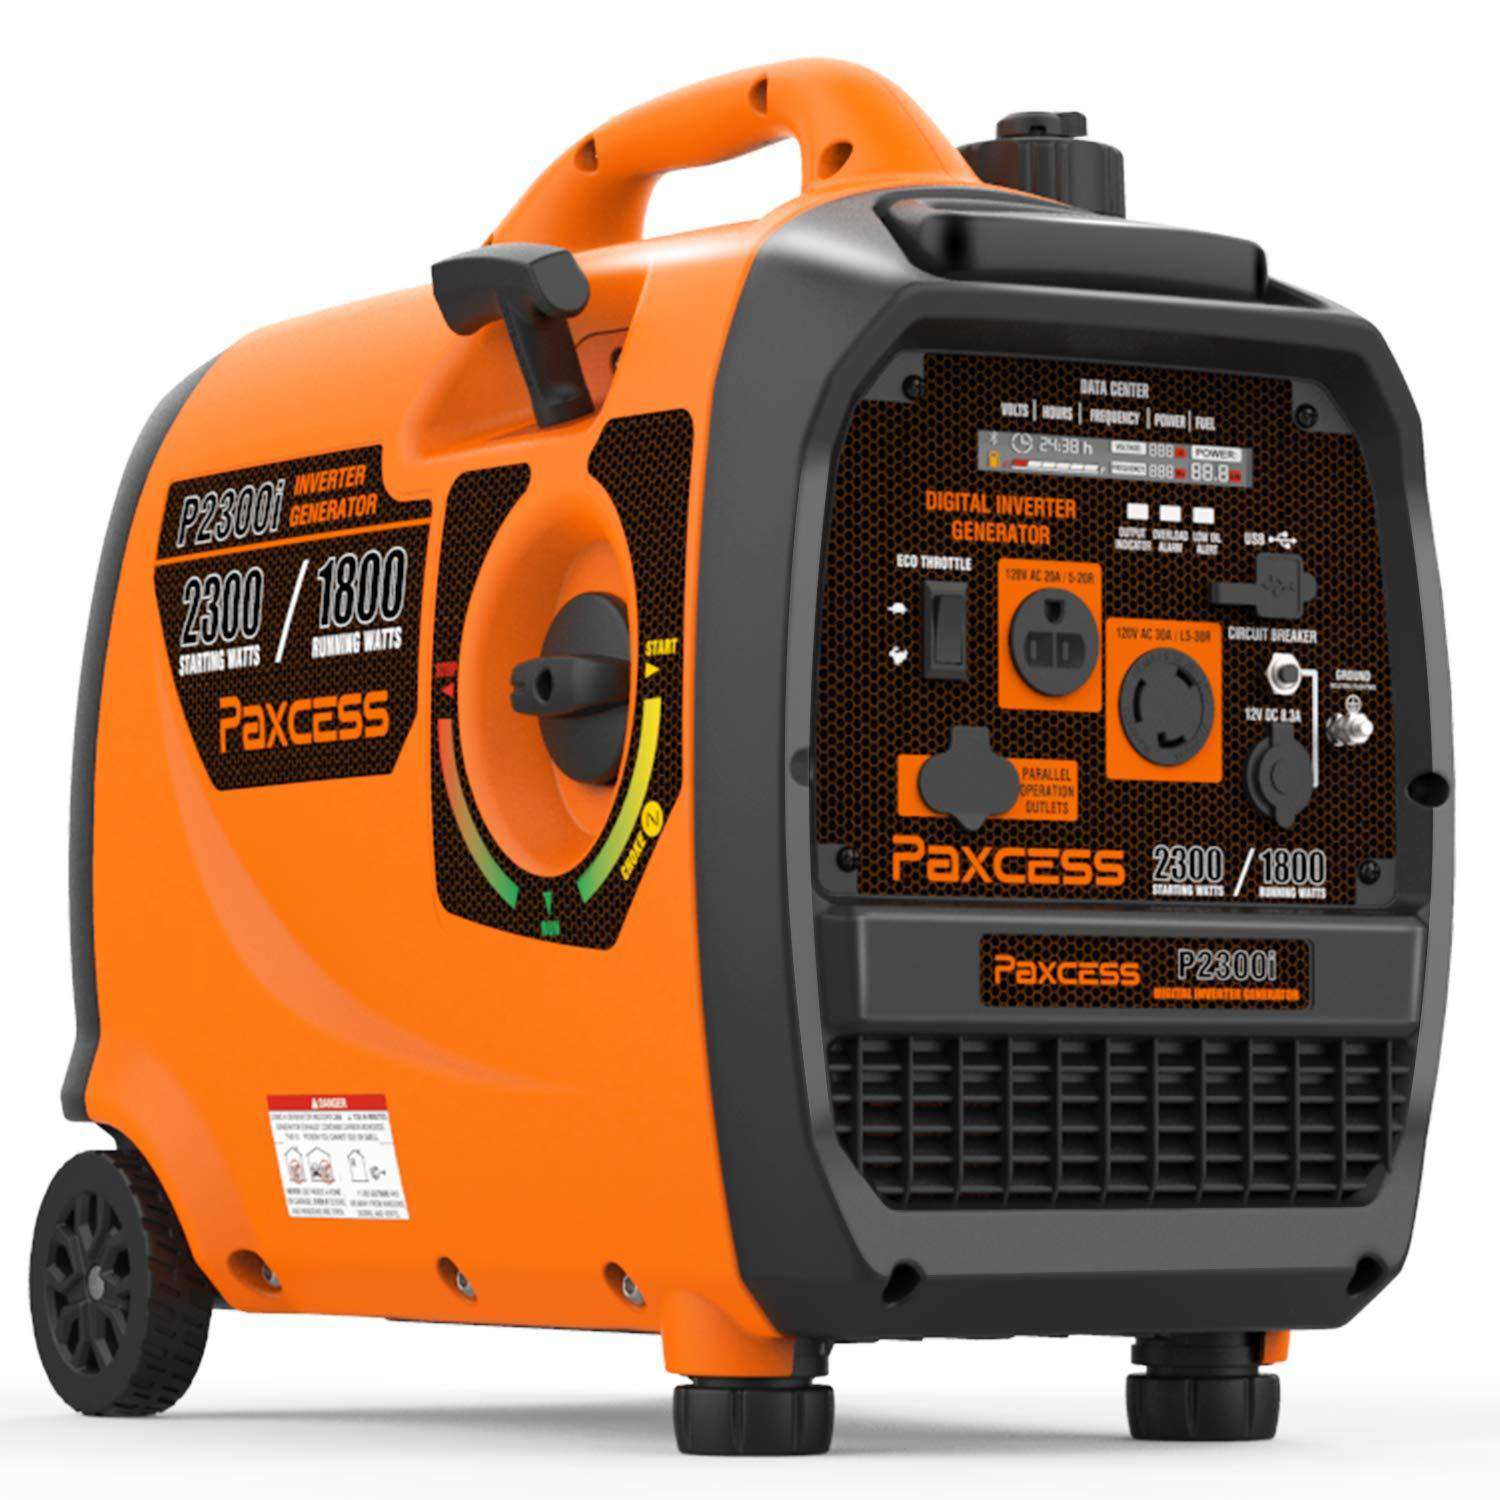 Paxcess P2300i 1800W/2300W Super Quiet Portable Gas Inverter Generator with Wheels and Handle New